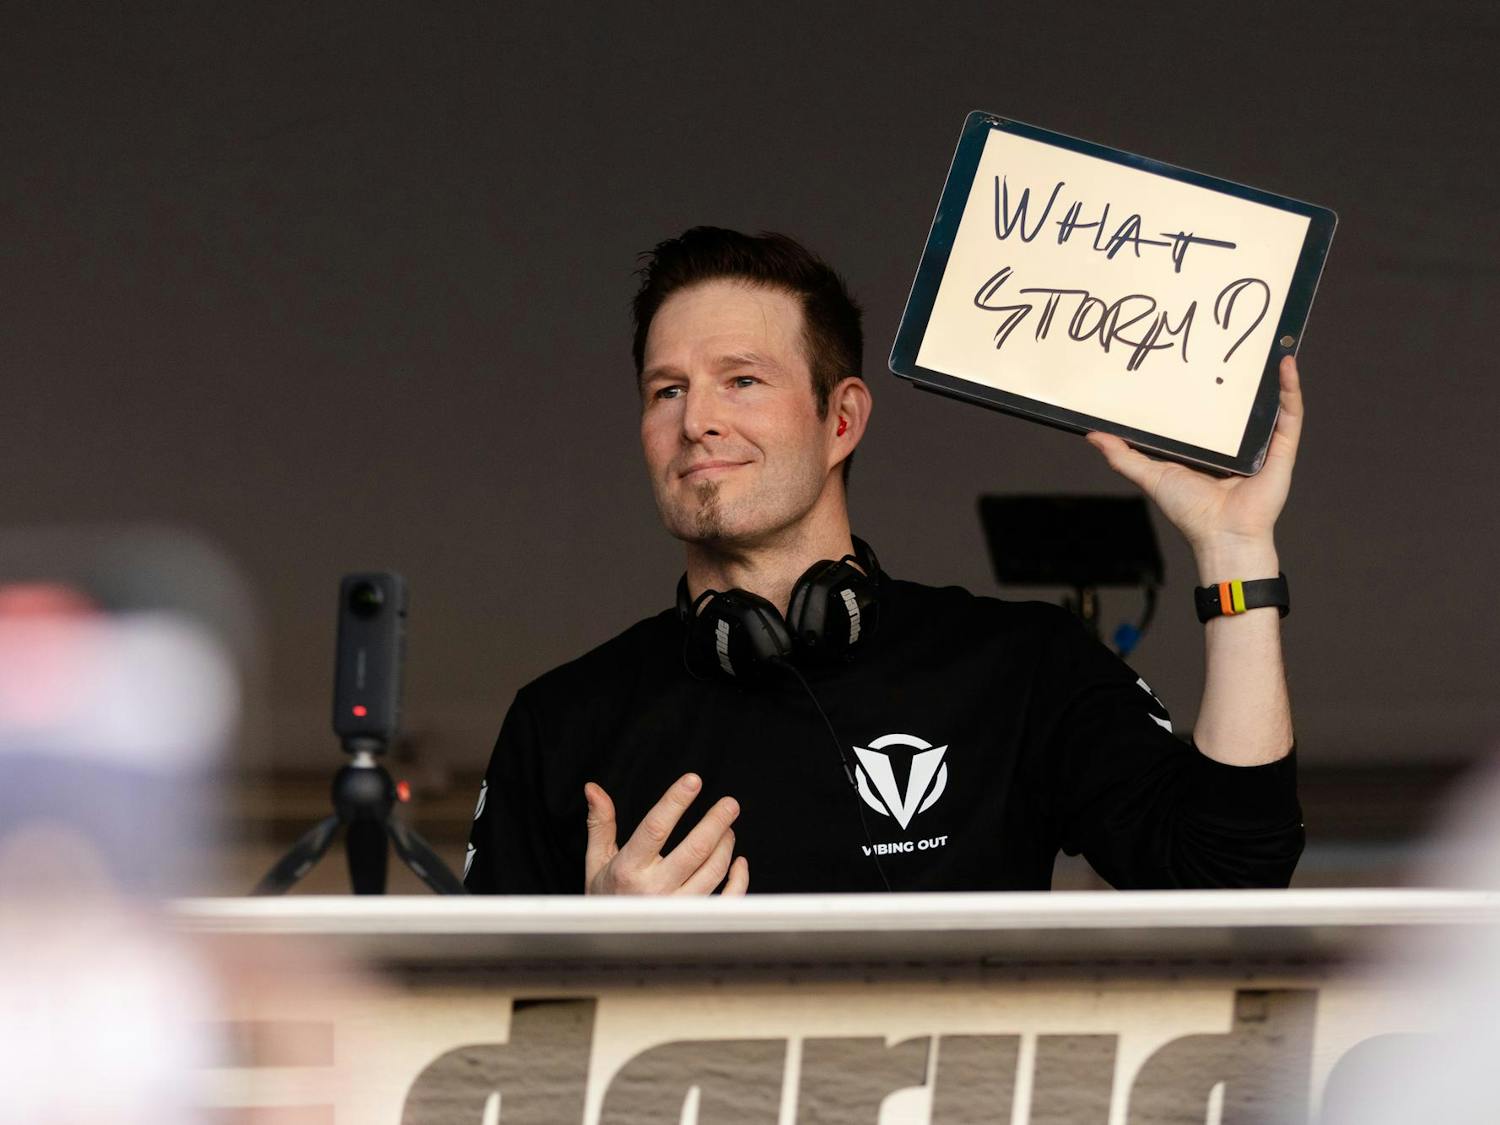 Finnish DJ Darude performed a mix of music from his discography, including songs from his newest album, "Together," and his hit single "Sandstorm," at a pre-game concert at Gamecock Park. Once in the stadium, Darude visited the sidelines and student section, and he DJ'd during the Gamecocks' game against Kentucky. The musician's song was first played by South Carolina in a game against Ole Miss in 2009 and has since become a Gamecock tradition.&nbsp;